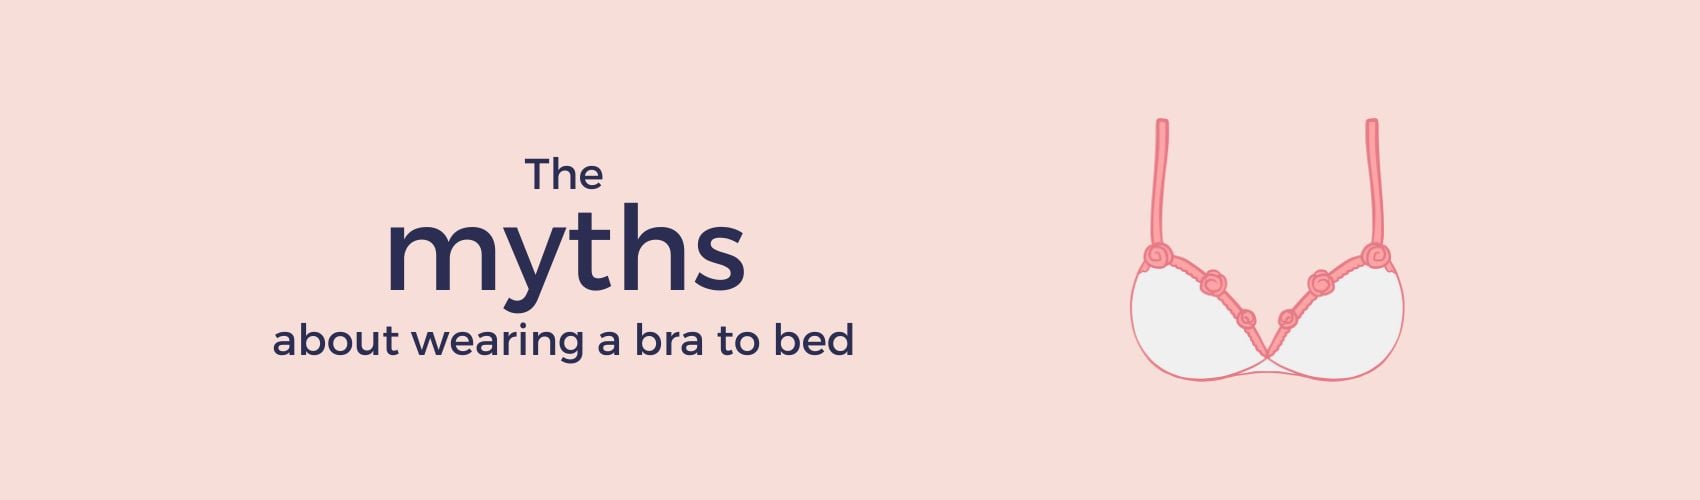 Should You Wear A Bra To Bed?